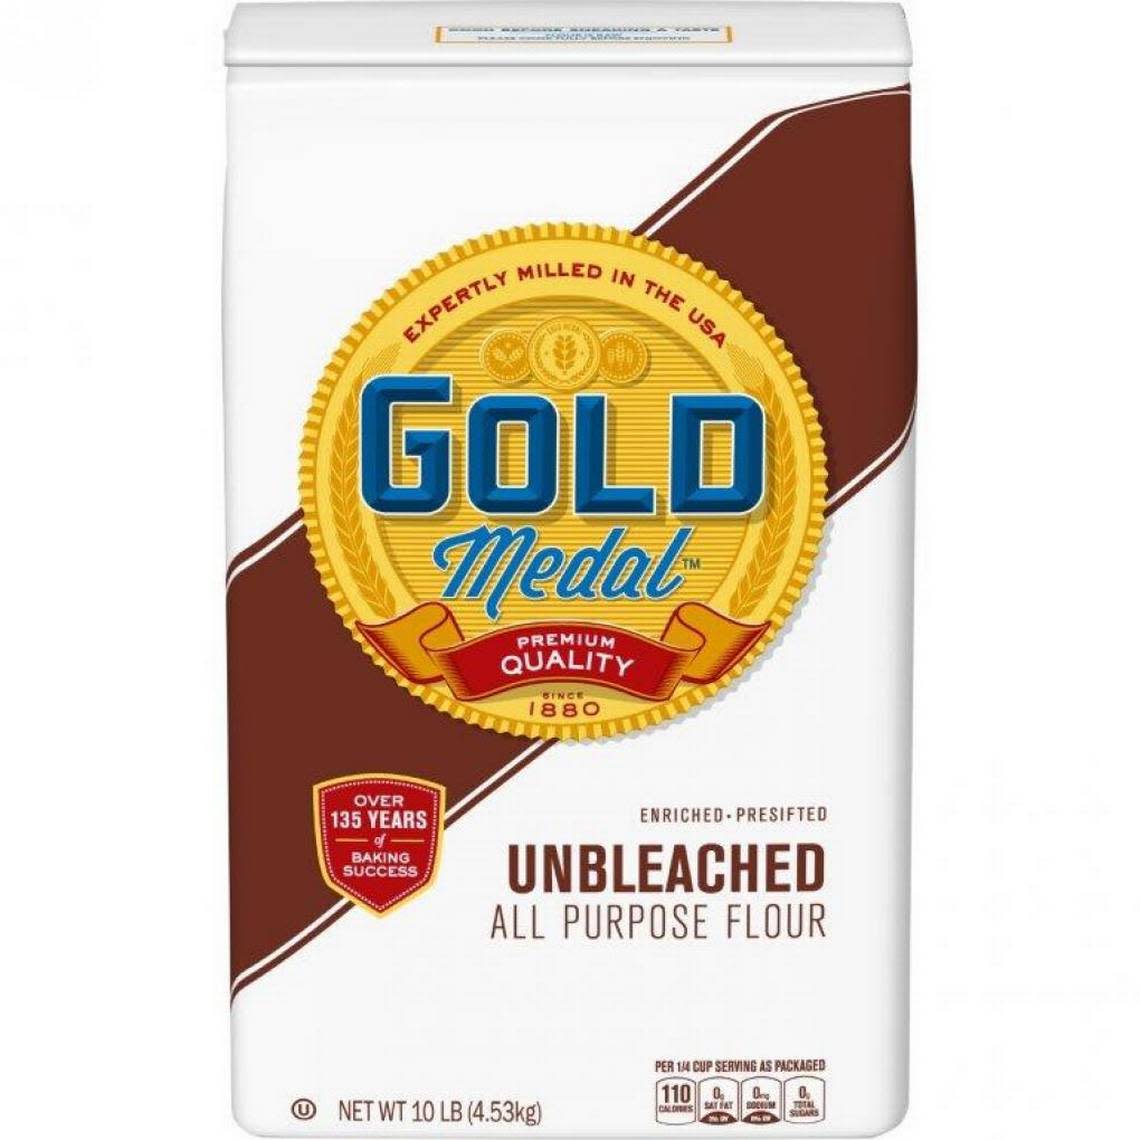 General Mills announced a national recall on April 28, 2023, of its 2-, 5- and 10-pound bags of its Gold Medal Unbleached and Bleached All Purpose Flour with several date codes.